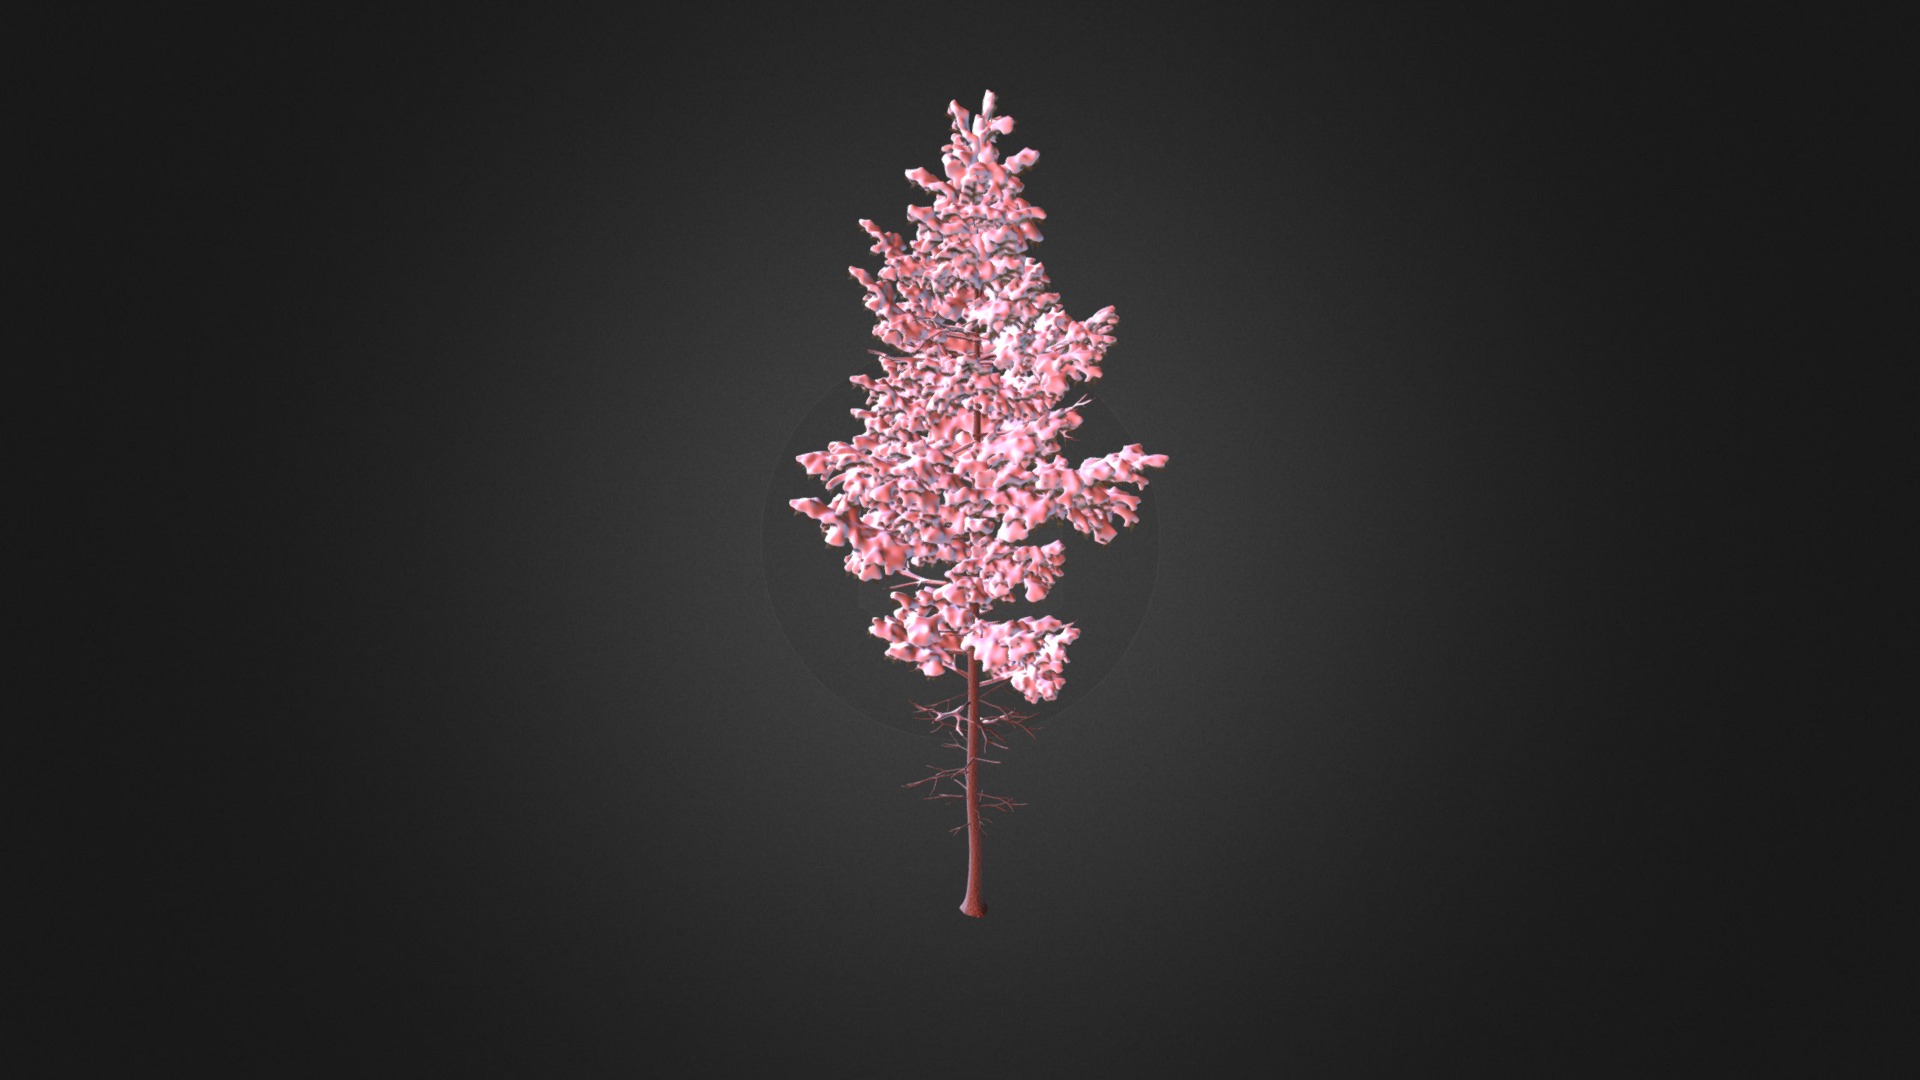 3D model Pine Tree with Snow 3D Model 10.2m - This is a 3D model of the Pine Tree with Snow 3D Model 10.2m. The 3D model is about a pink flower with a stem.